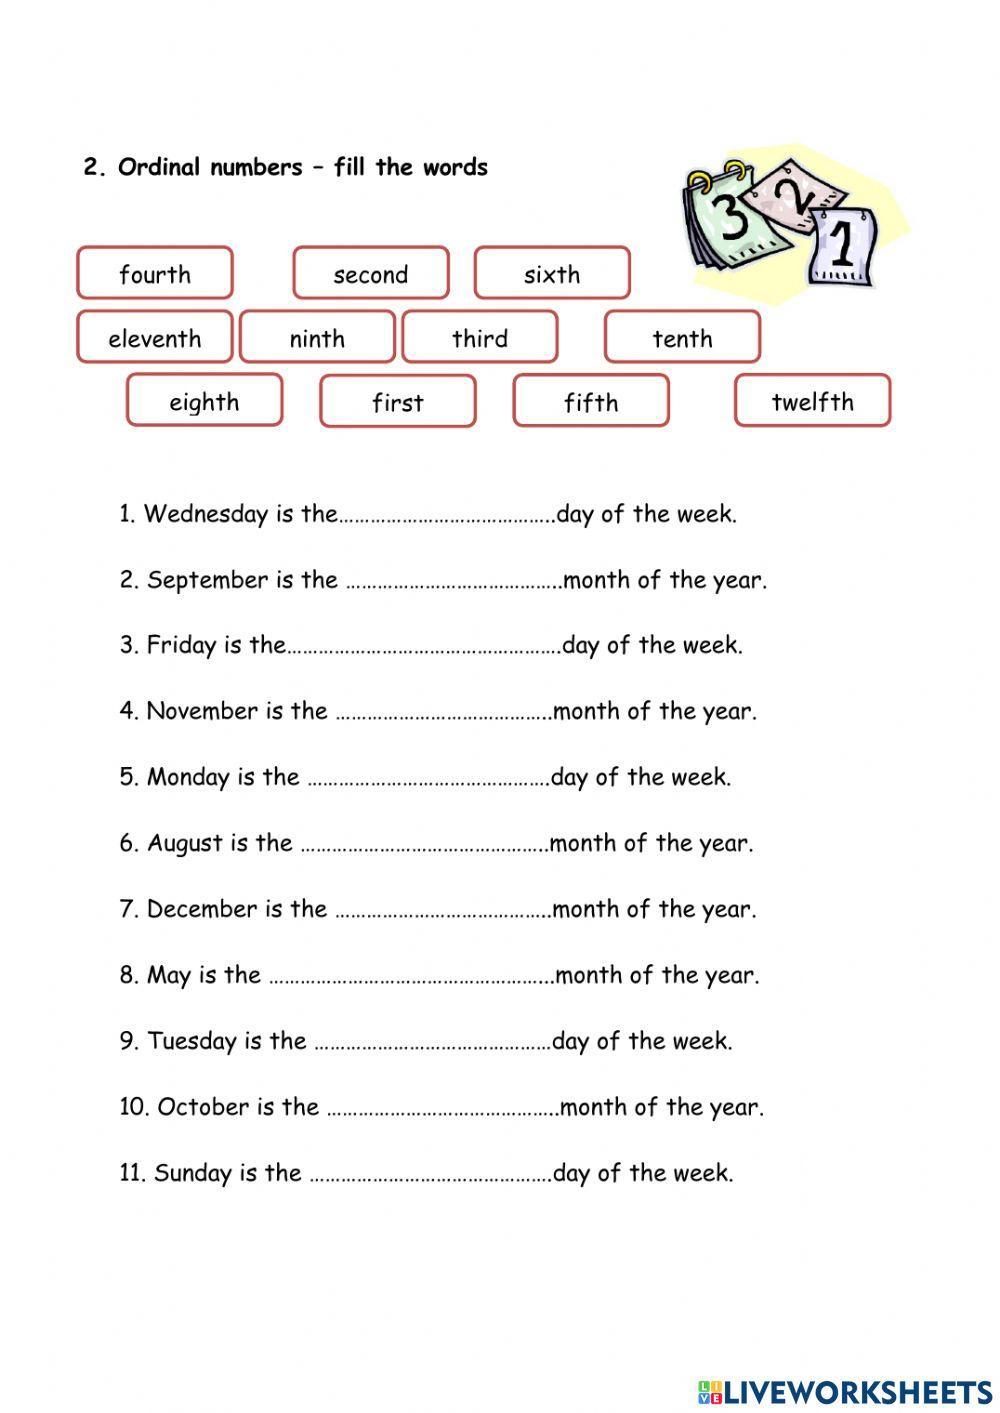 Ordinal numbers, days, months